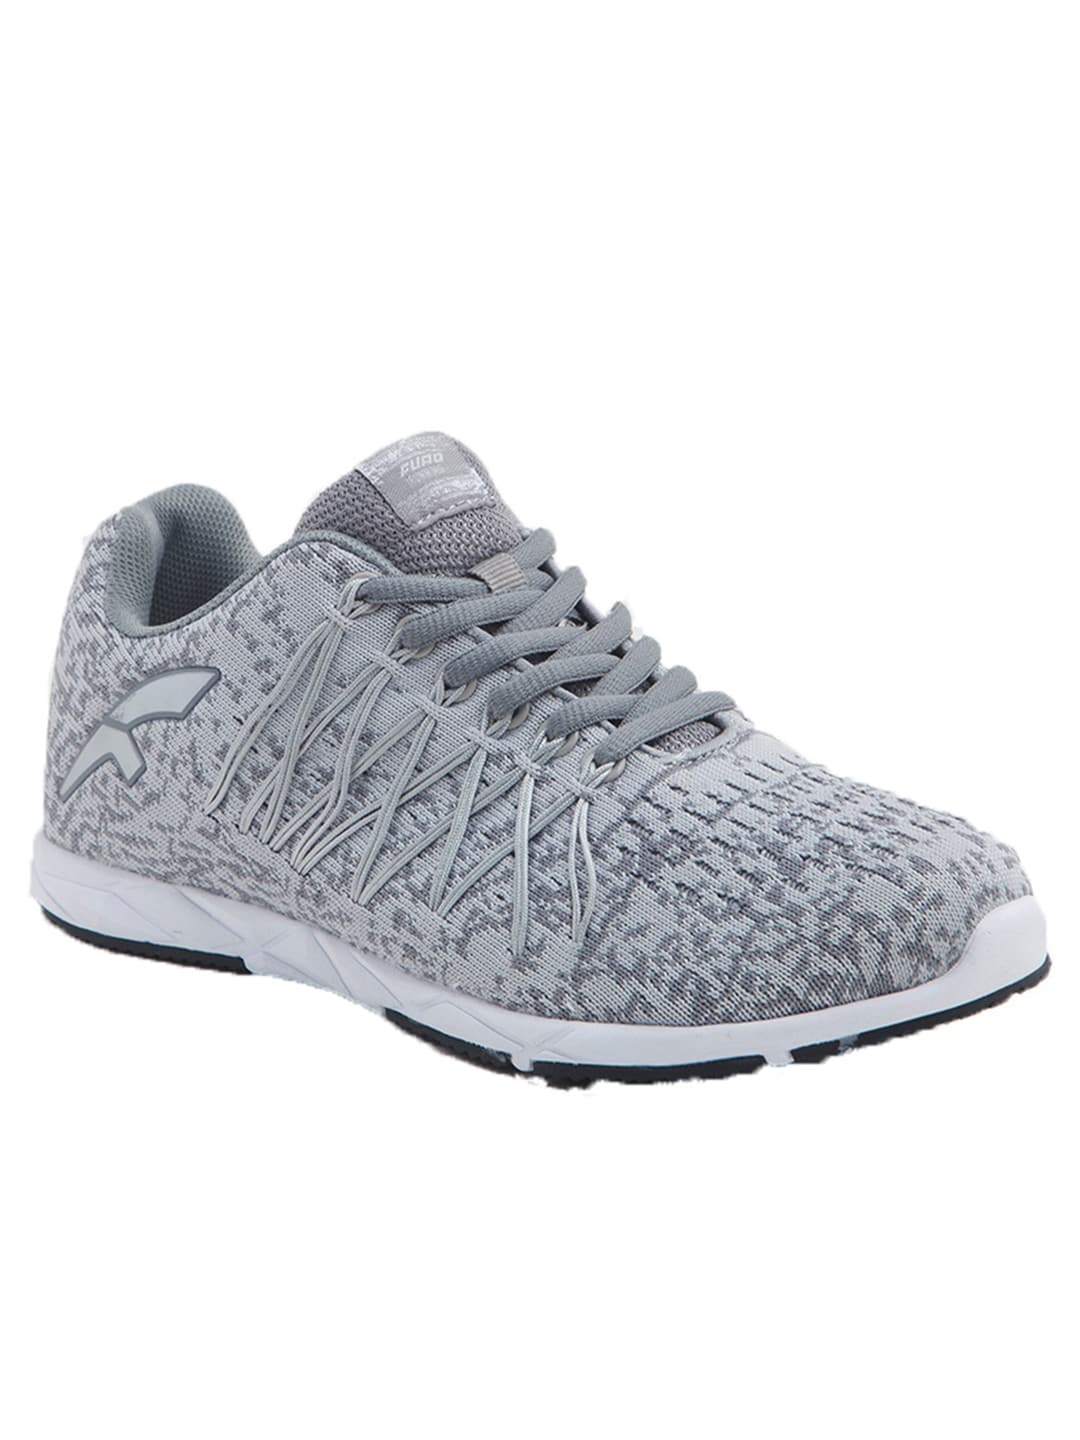 FURO by Red Chief Women Grey Running Shoes Price in India